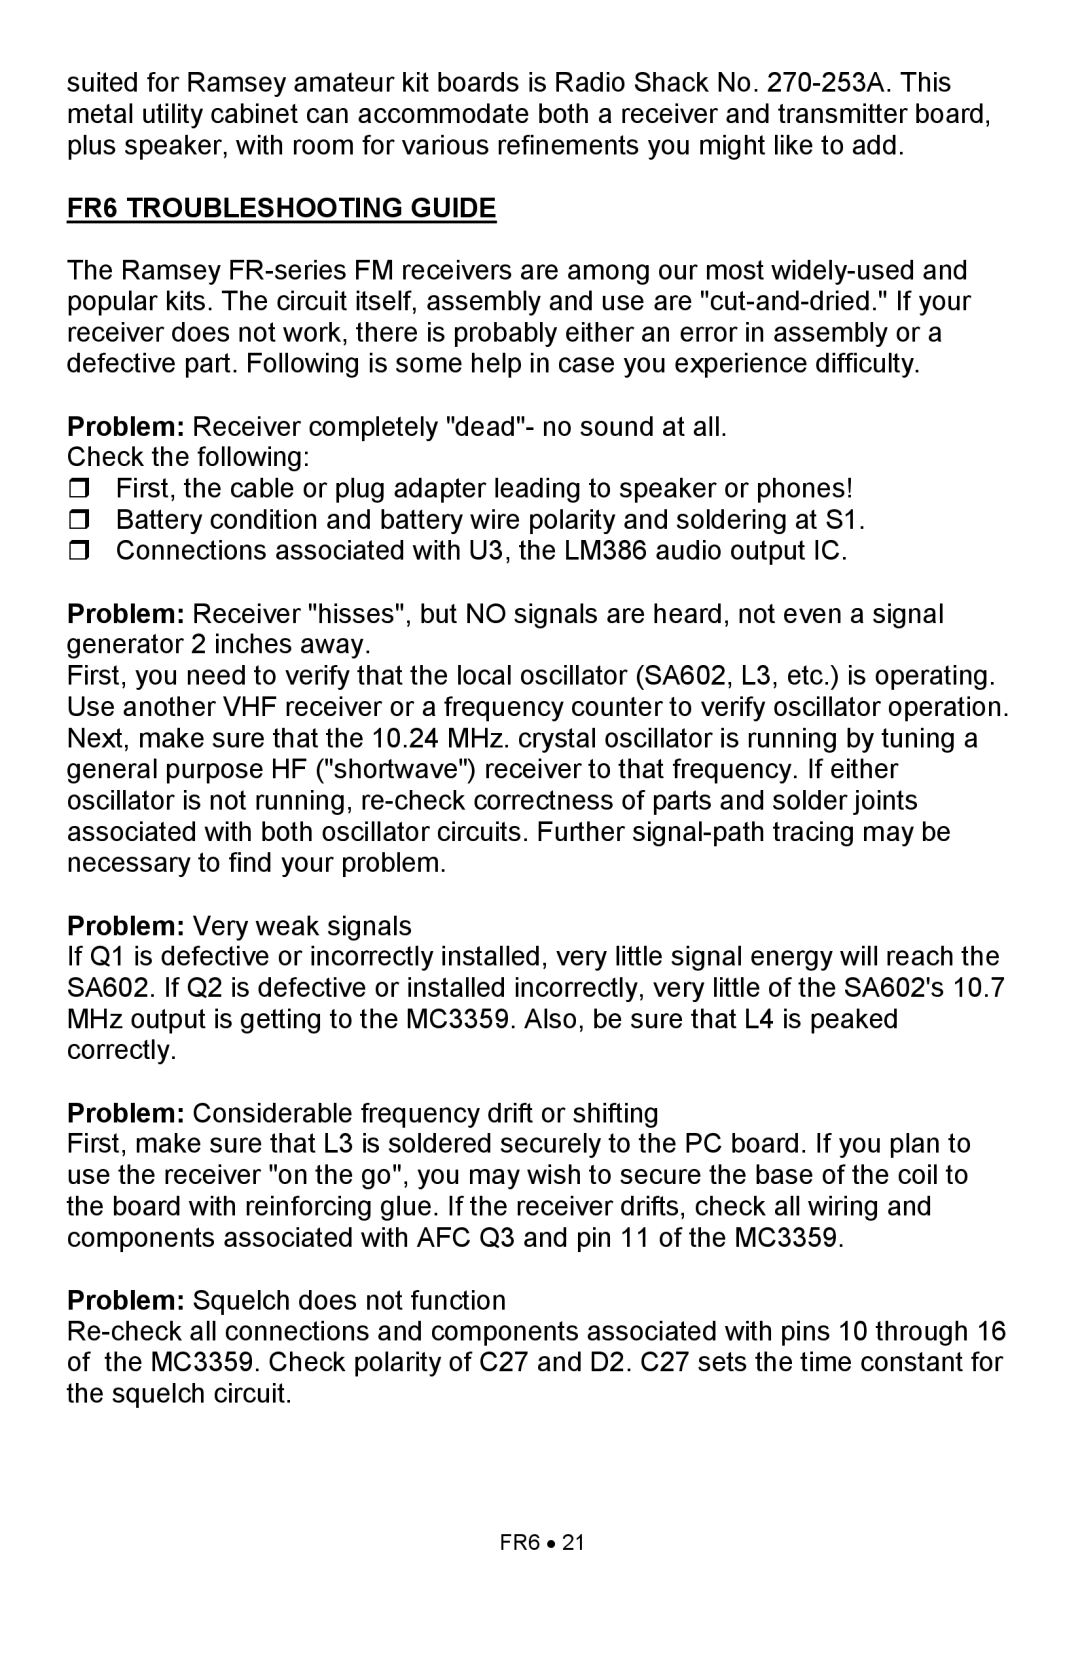 Ramsey Electronics manual FR6 TROUBLESHOOTING GUIDE 